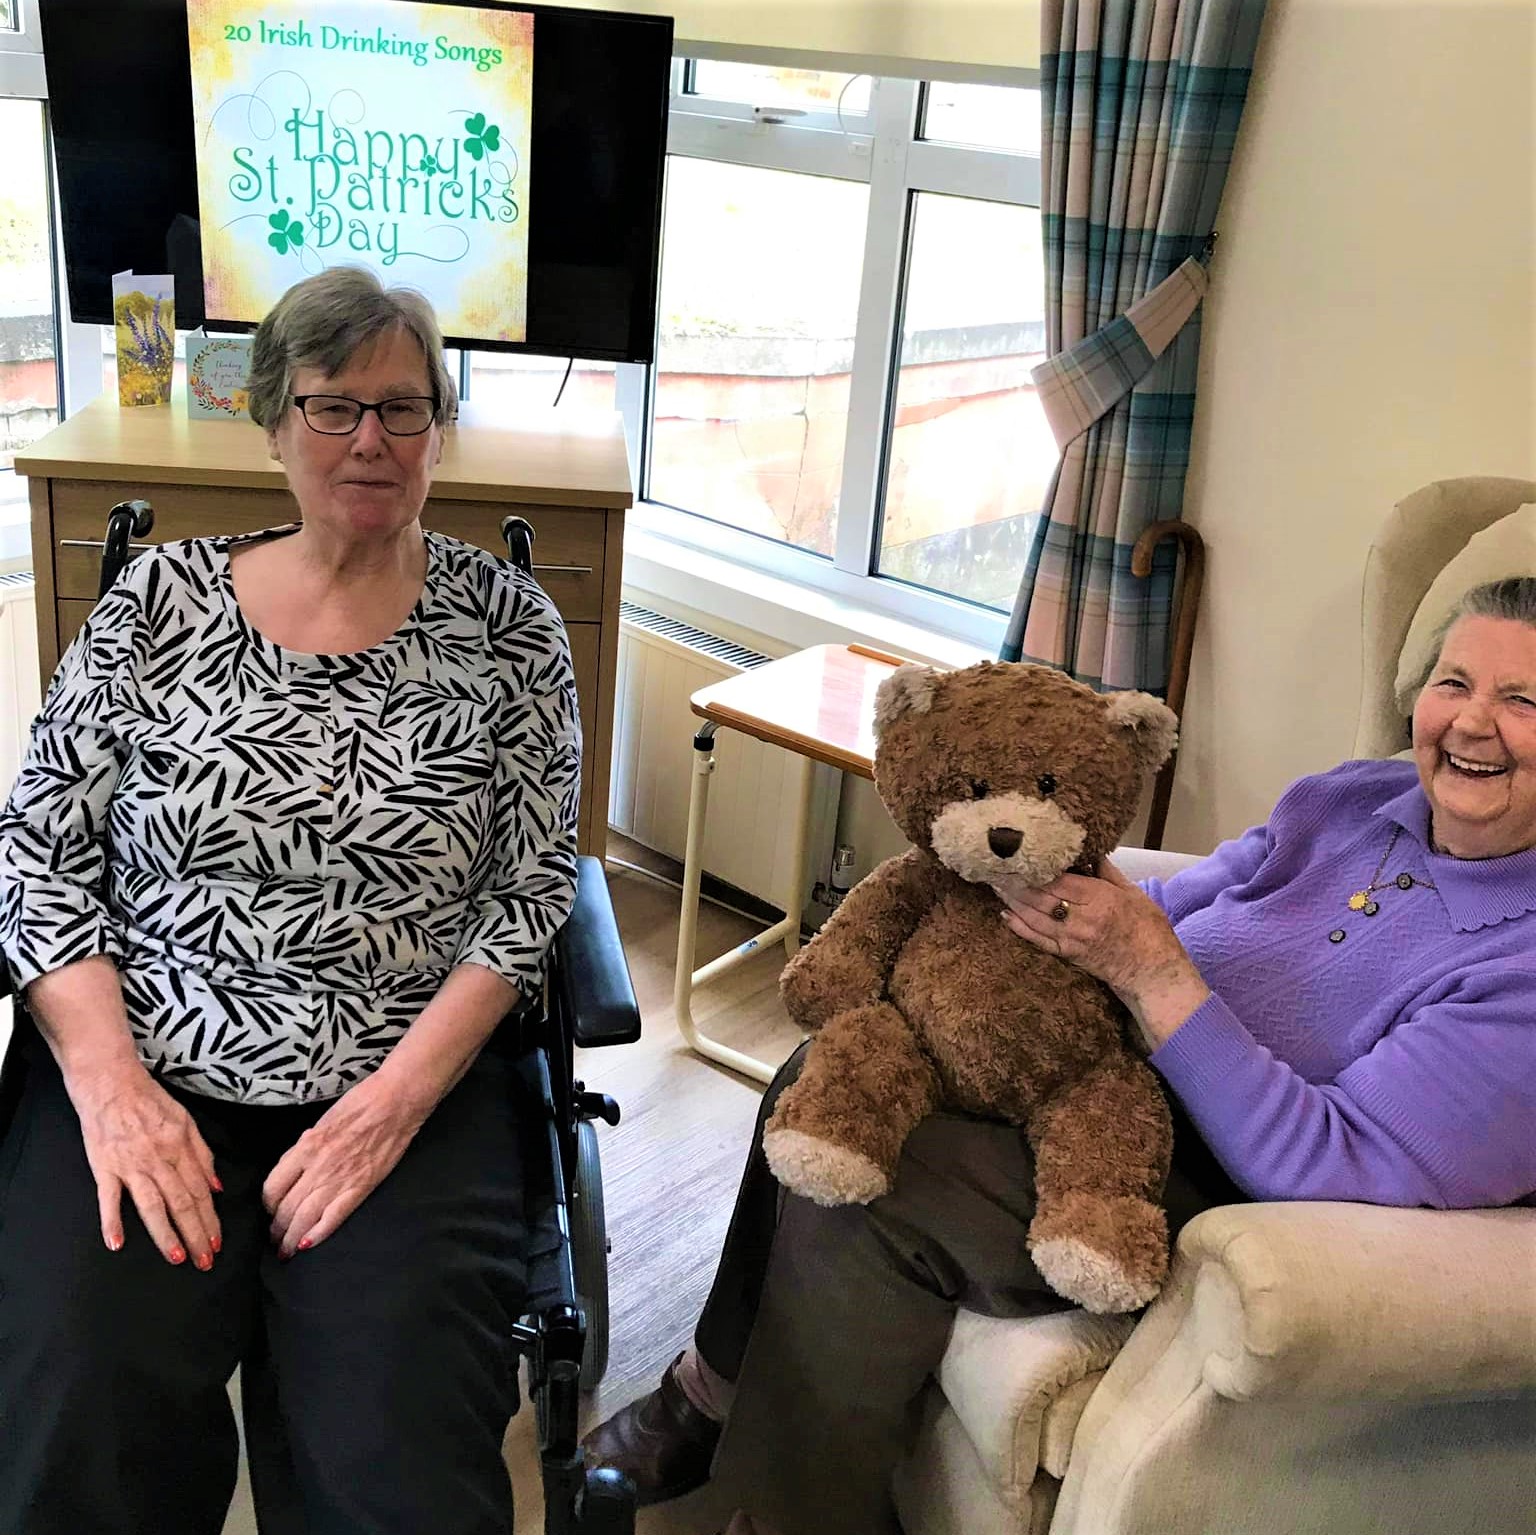 Wheatlands - residents sat in armchair with teddy